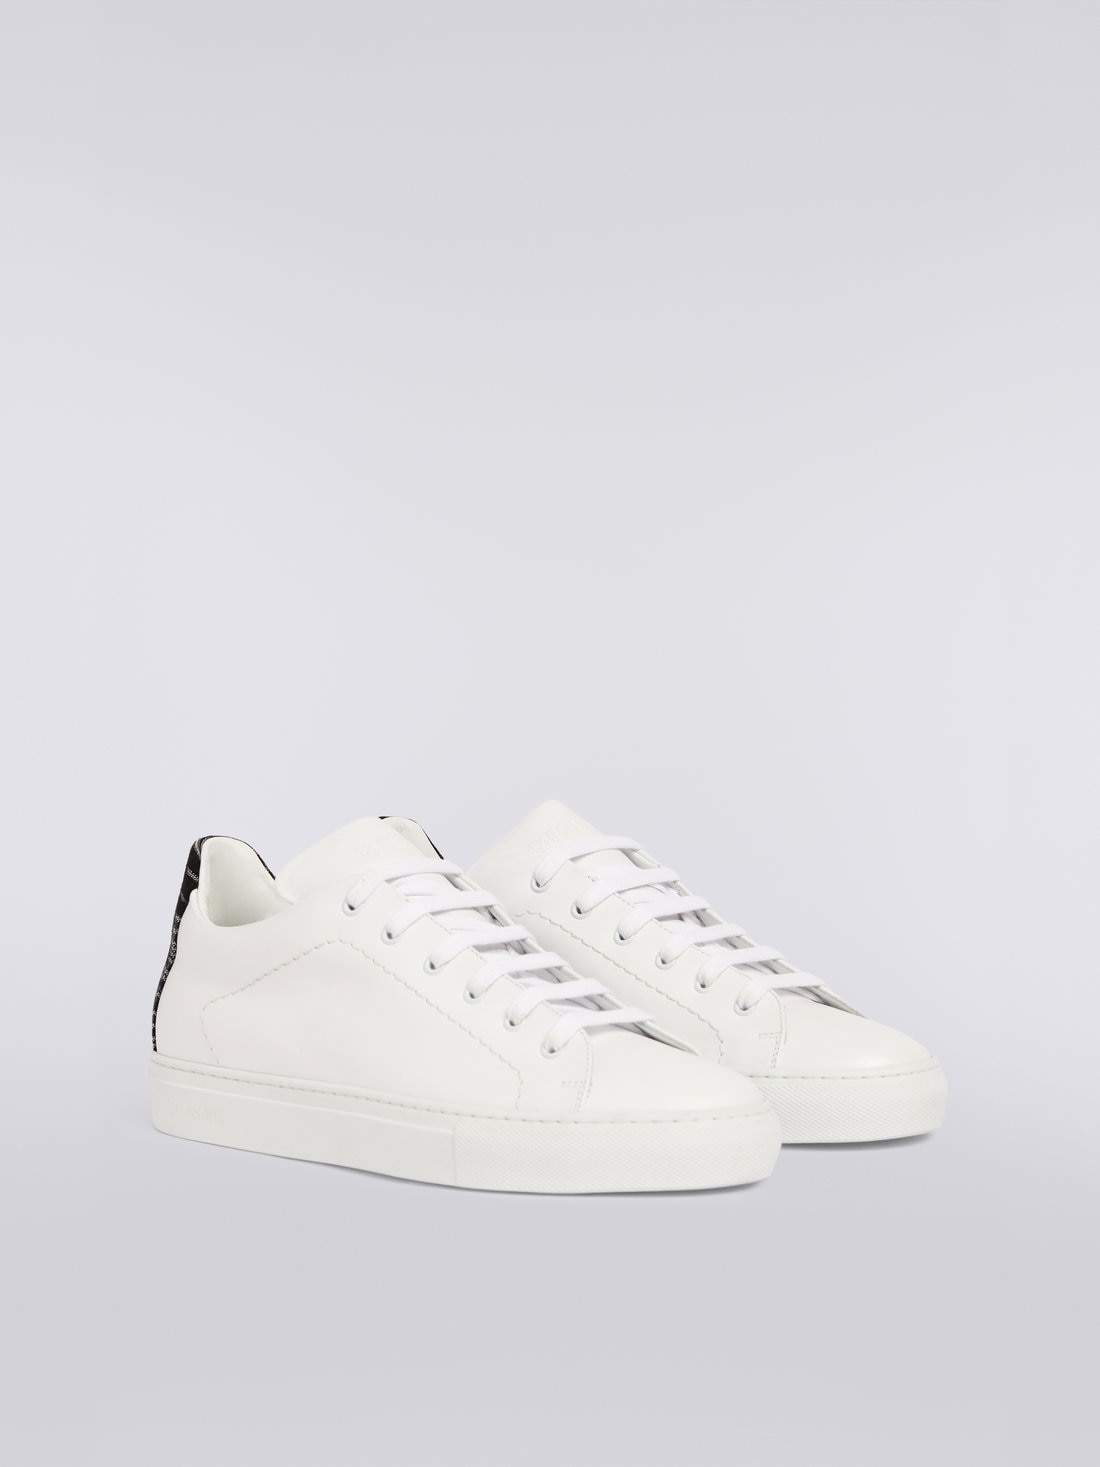 Leather trainers with slub insert, White  - OC23WY00BL007US0191 - 1